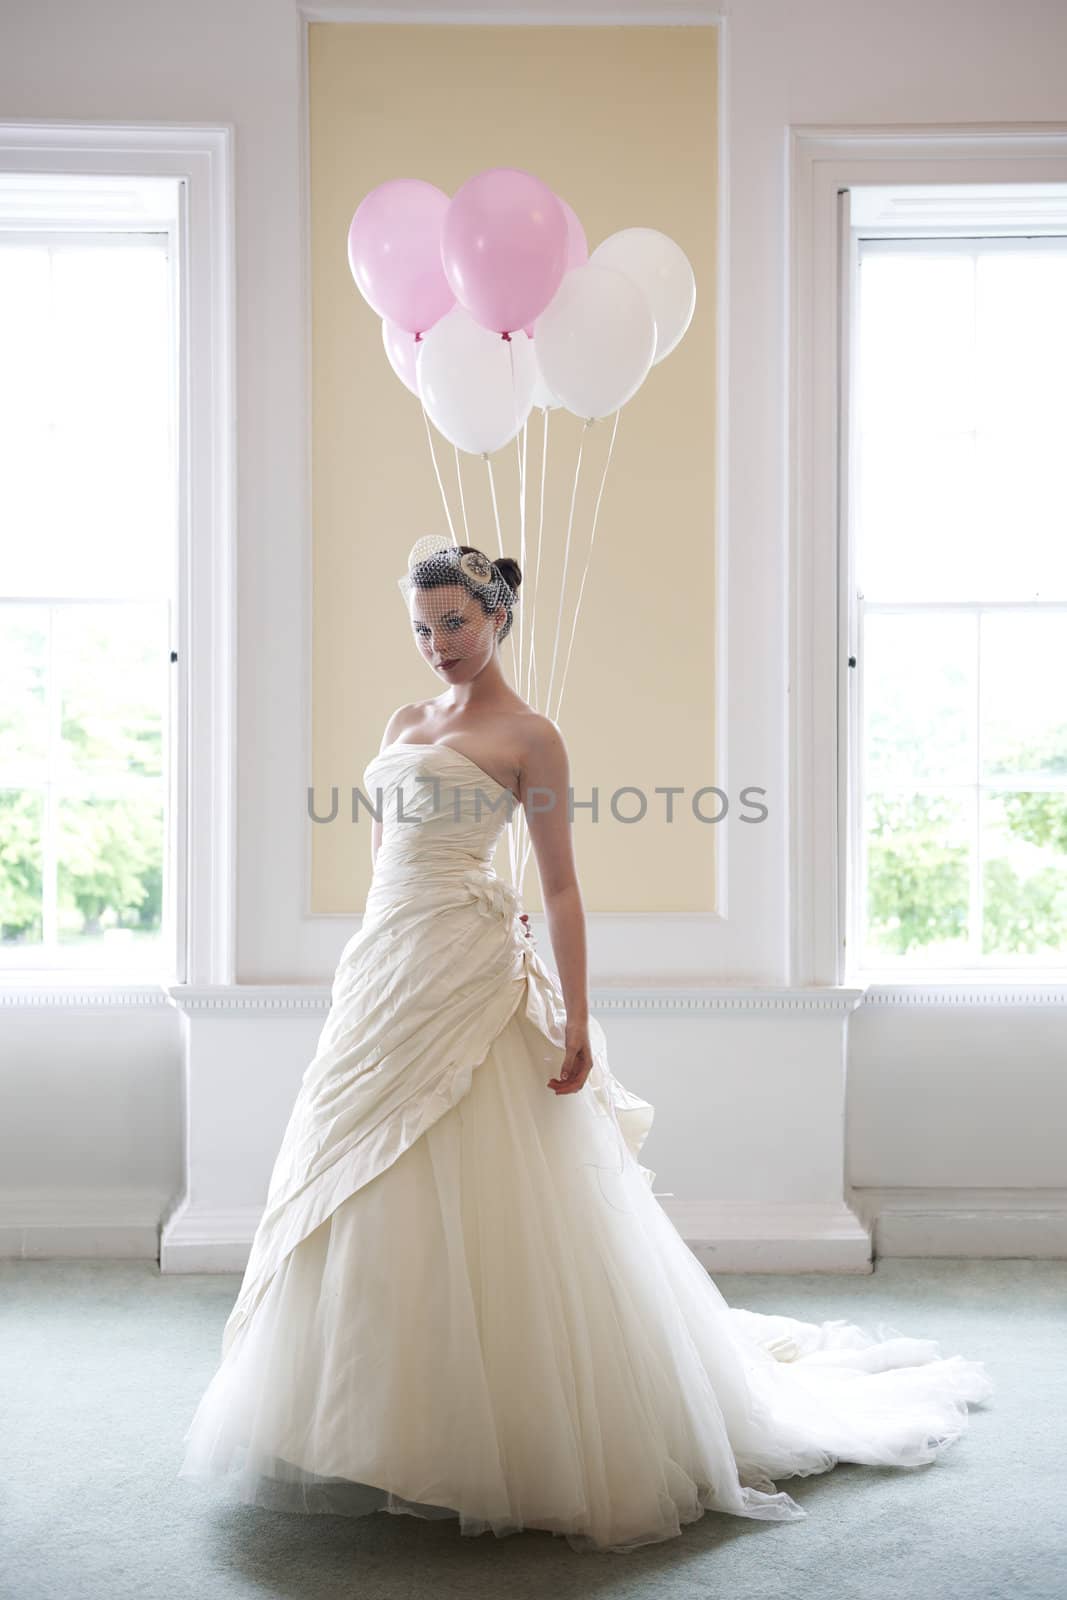 Bride and ballons by gemphotography